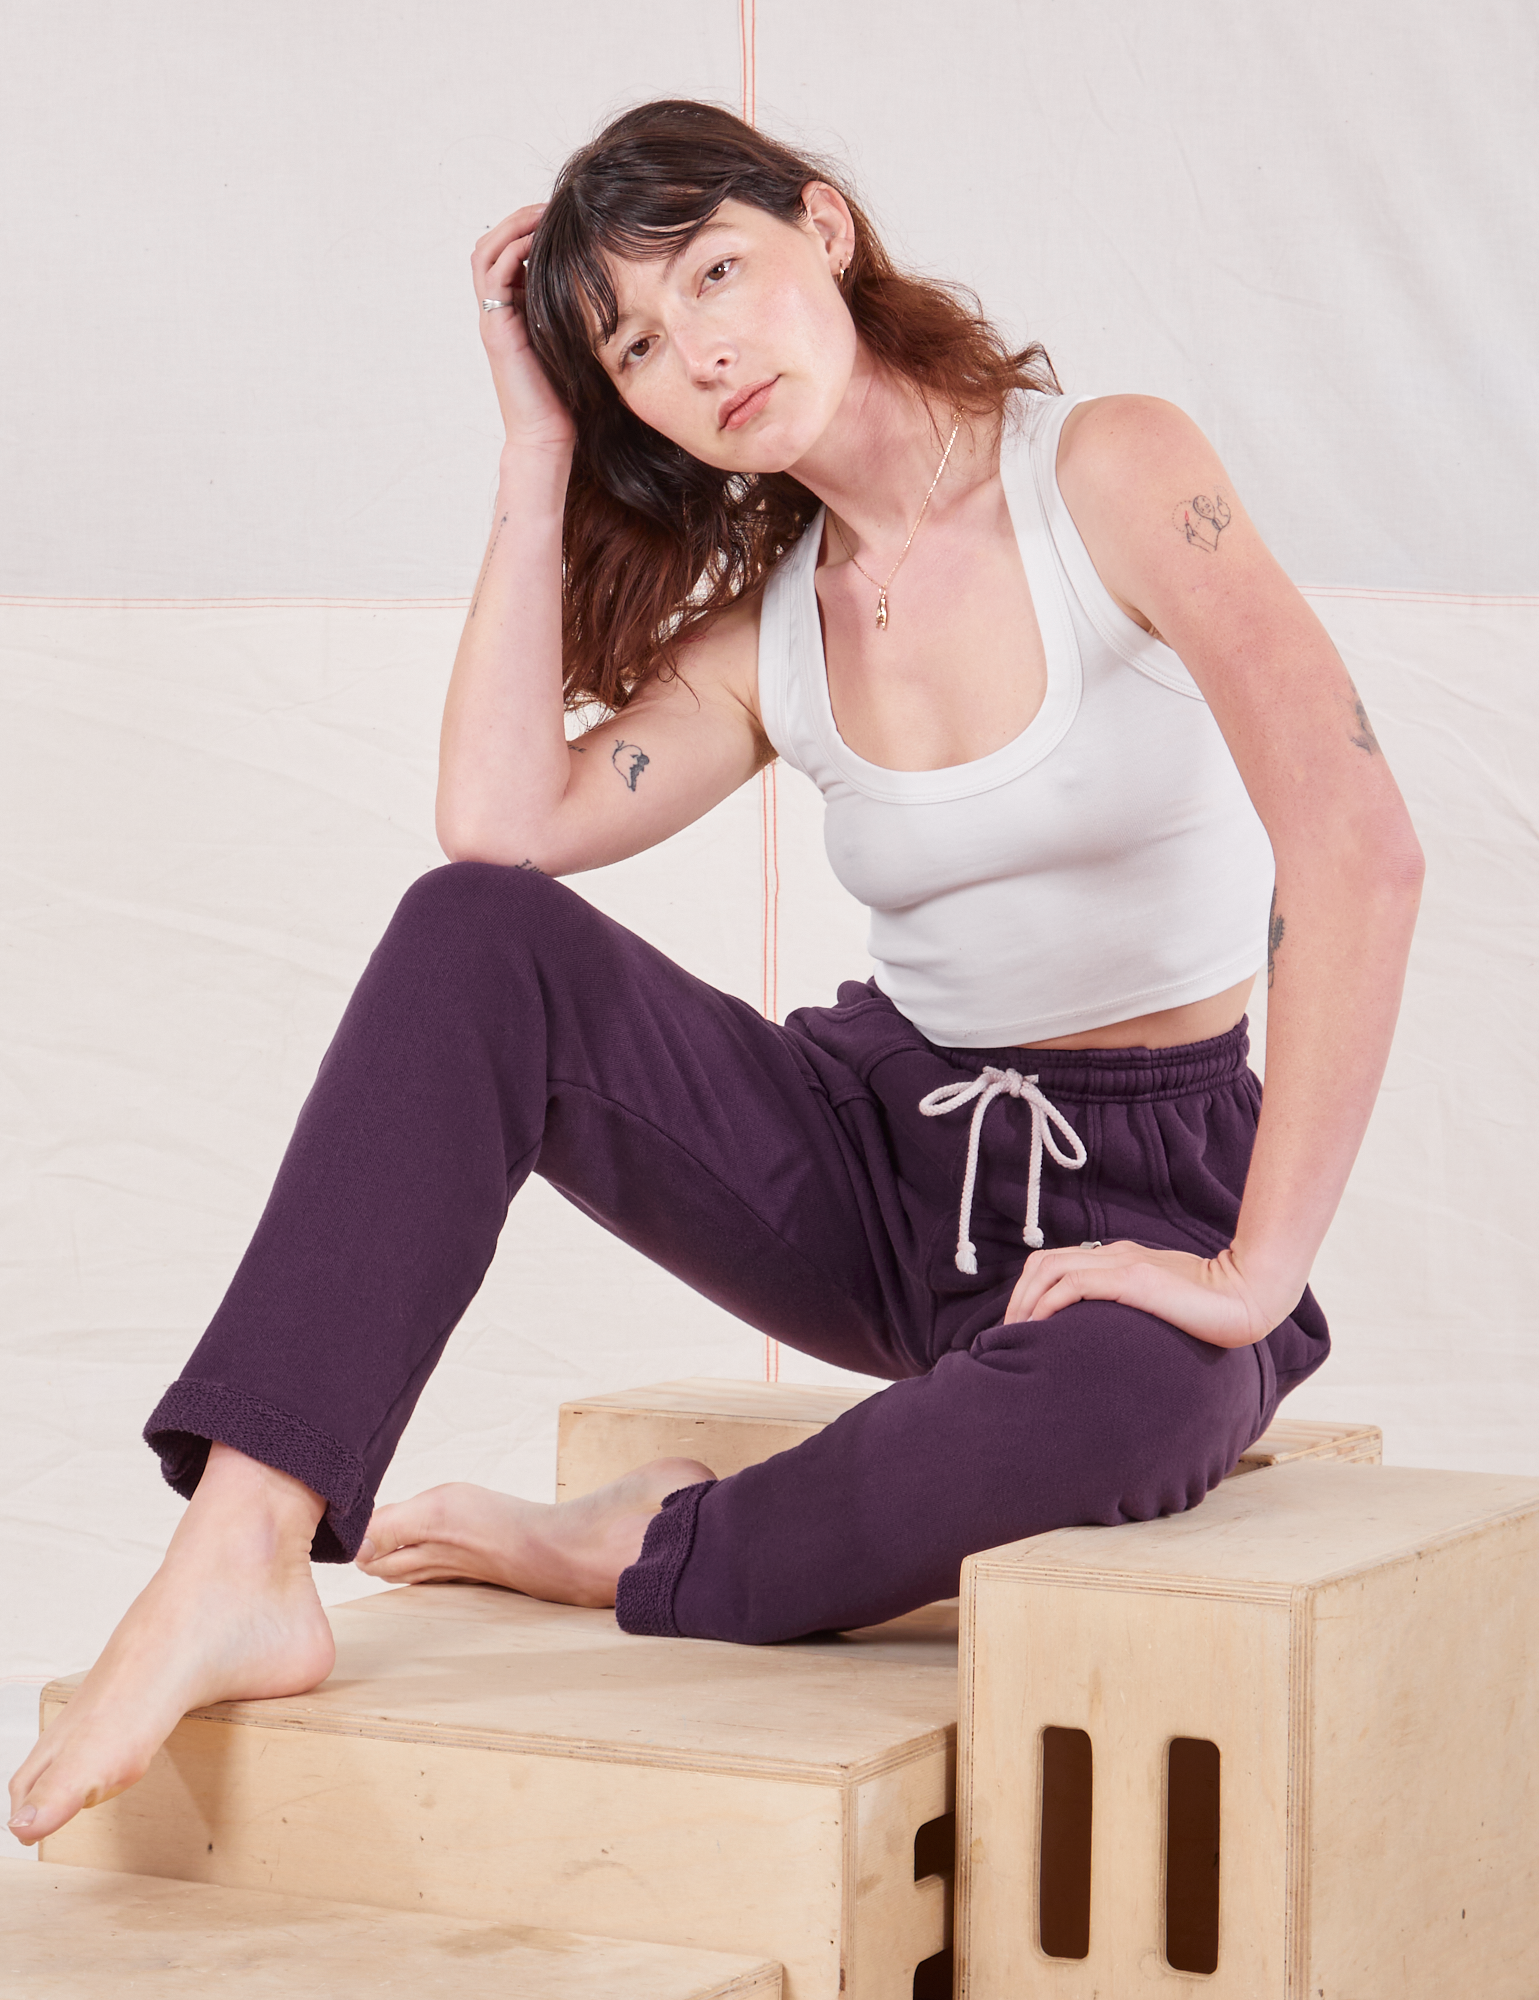 Alex is wearing Rolled Cuff Sweat Pants in Nebula Purple and vintage off-white Cropped Tank